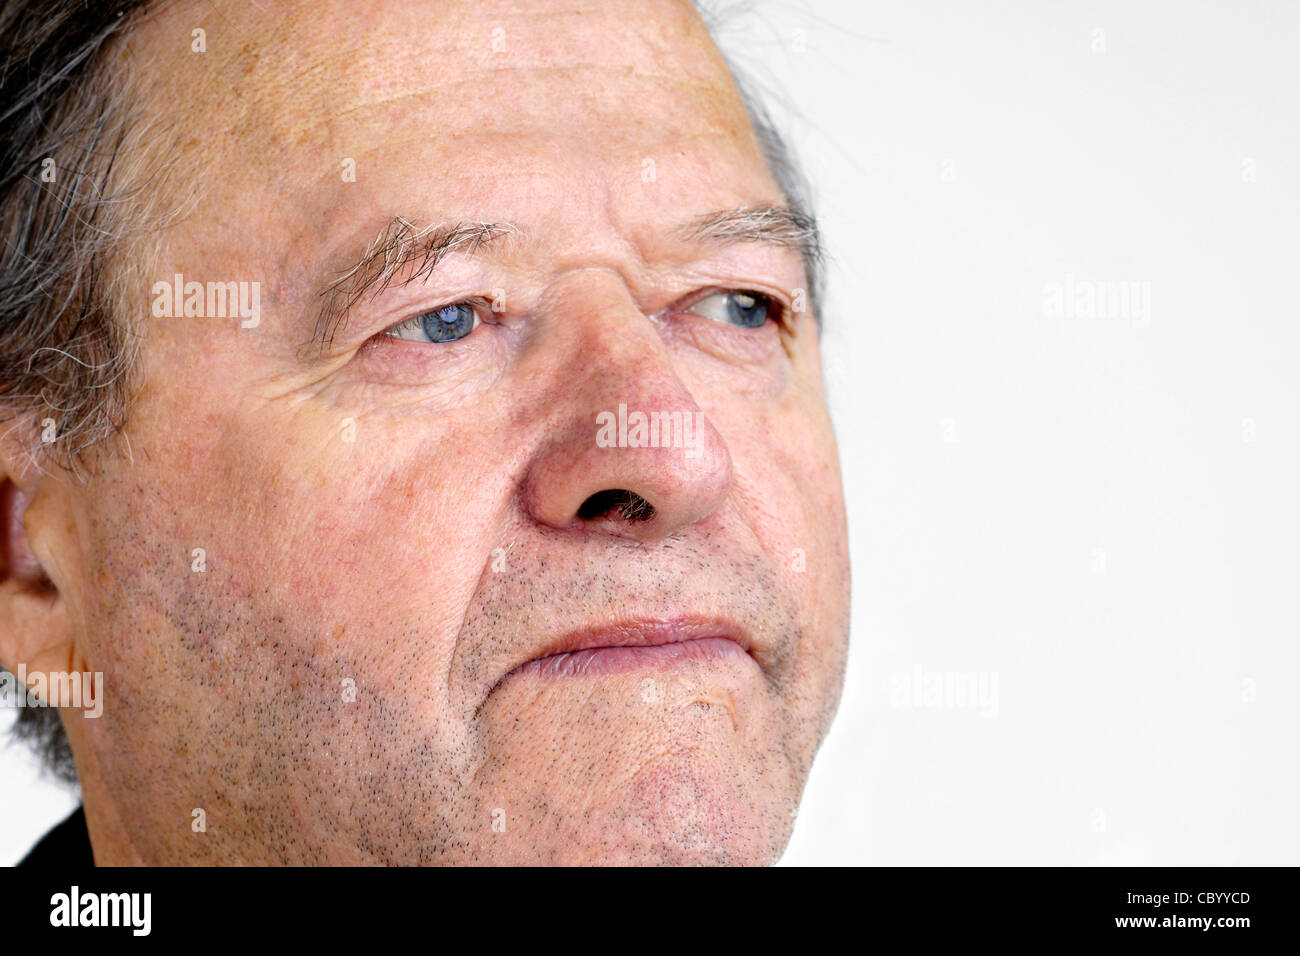 Portrait of a senior man with blue eyes looking away with hint of a smile, great facial details, over white. Stock Photo